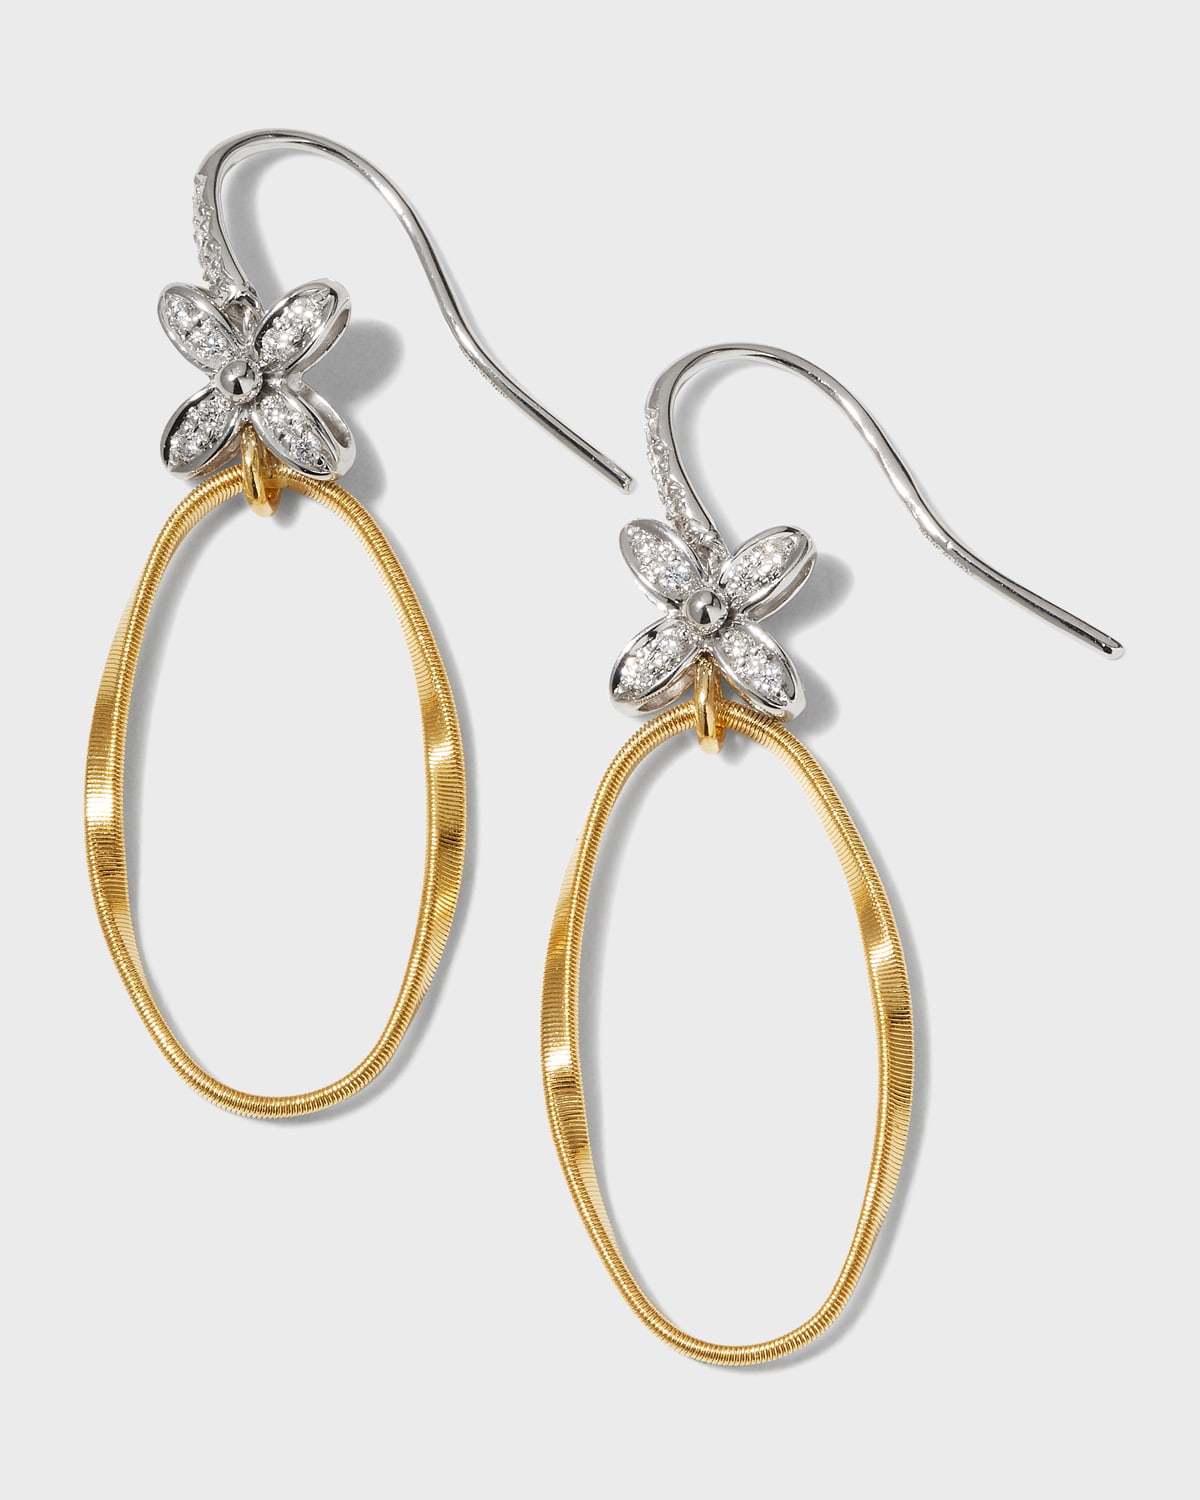 Marrakech Onde 18k Yellow and White Gold French Hoop Earrings